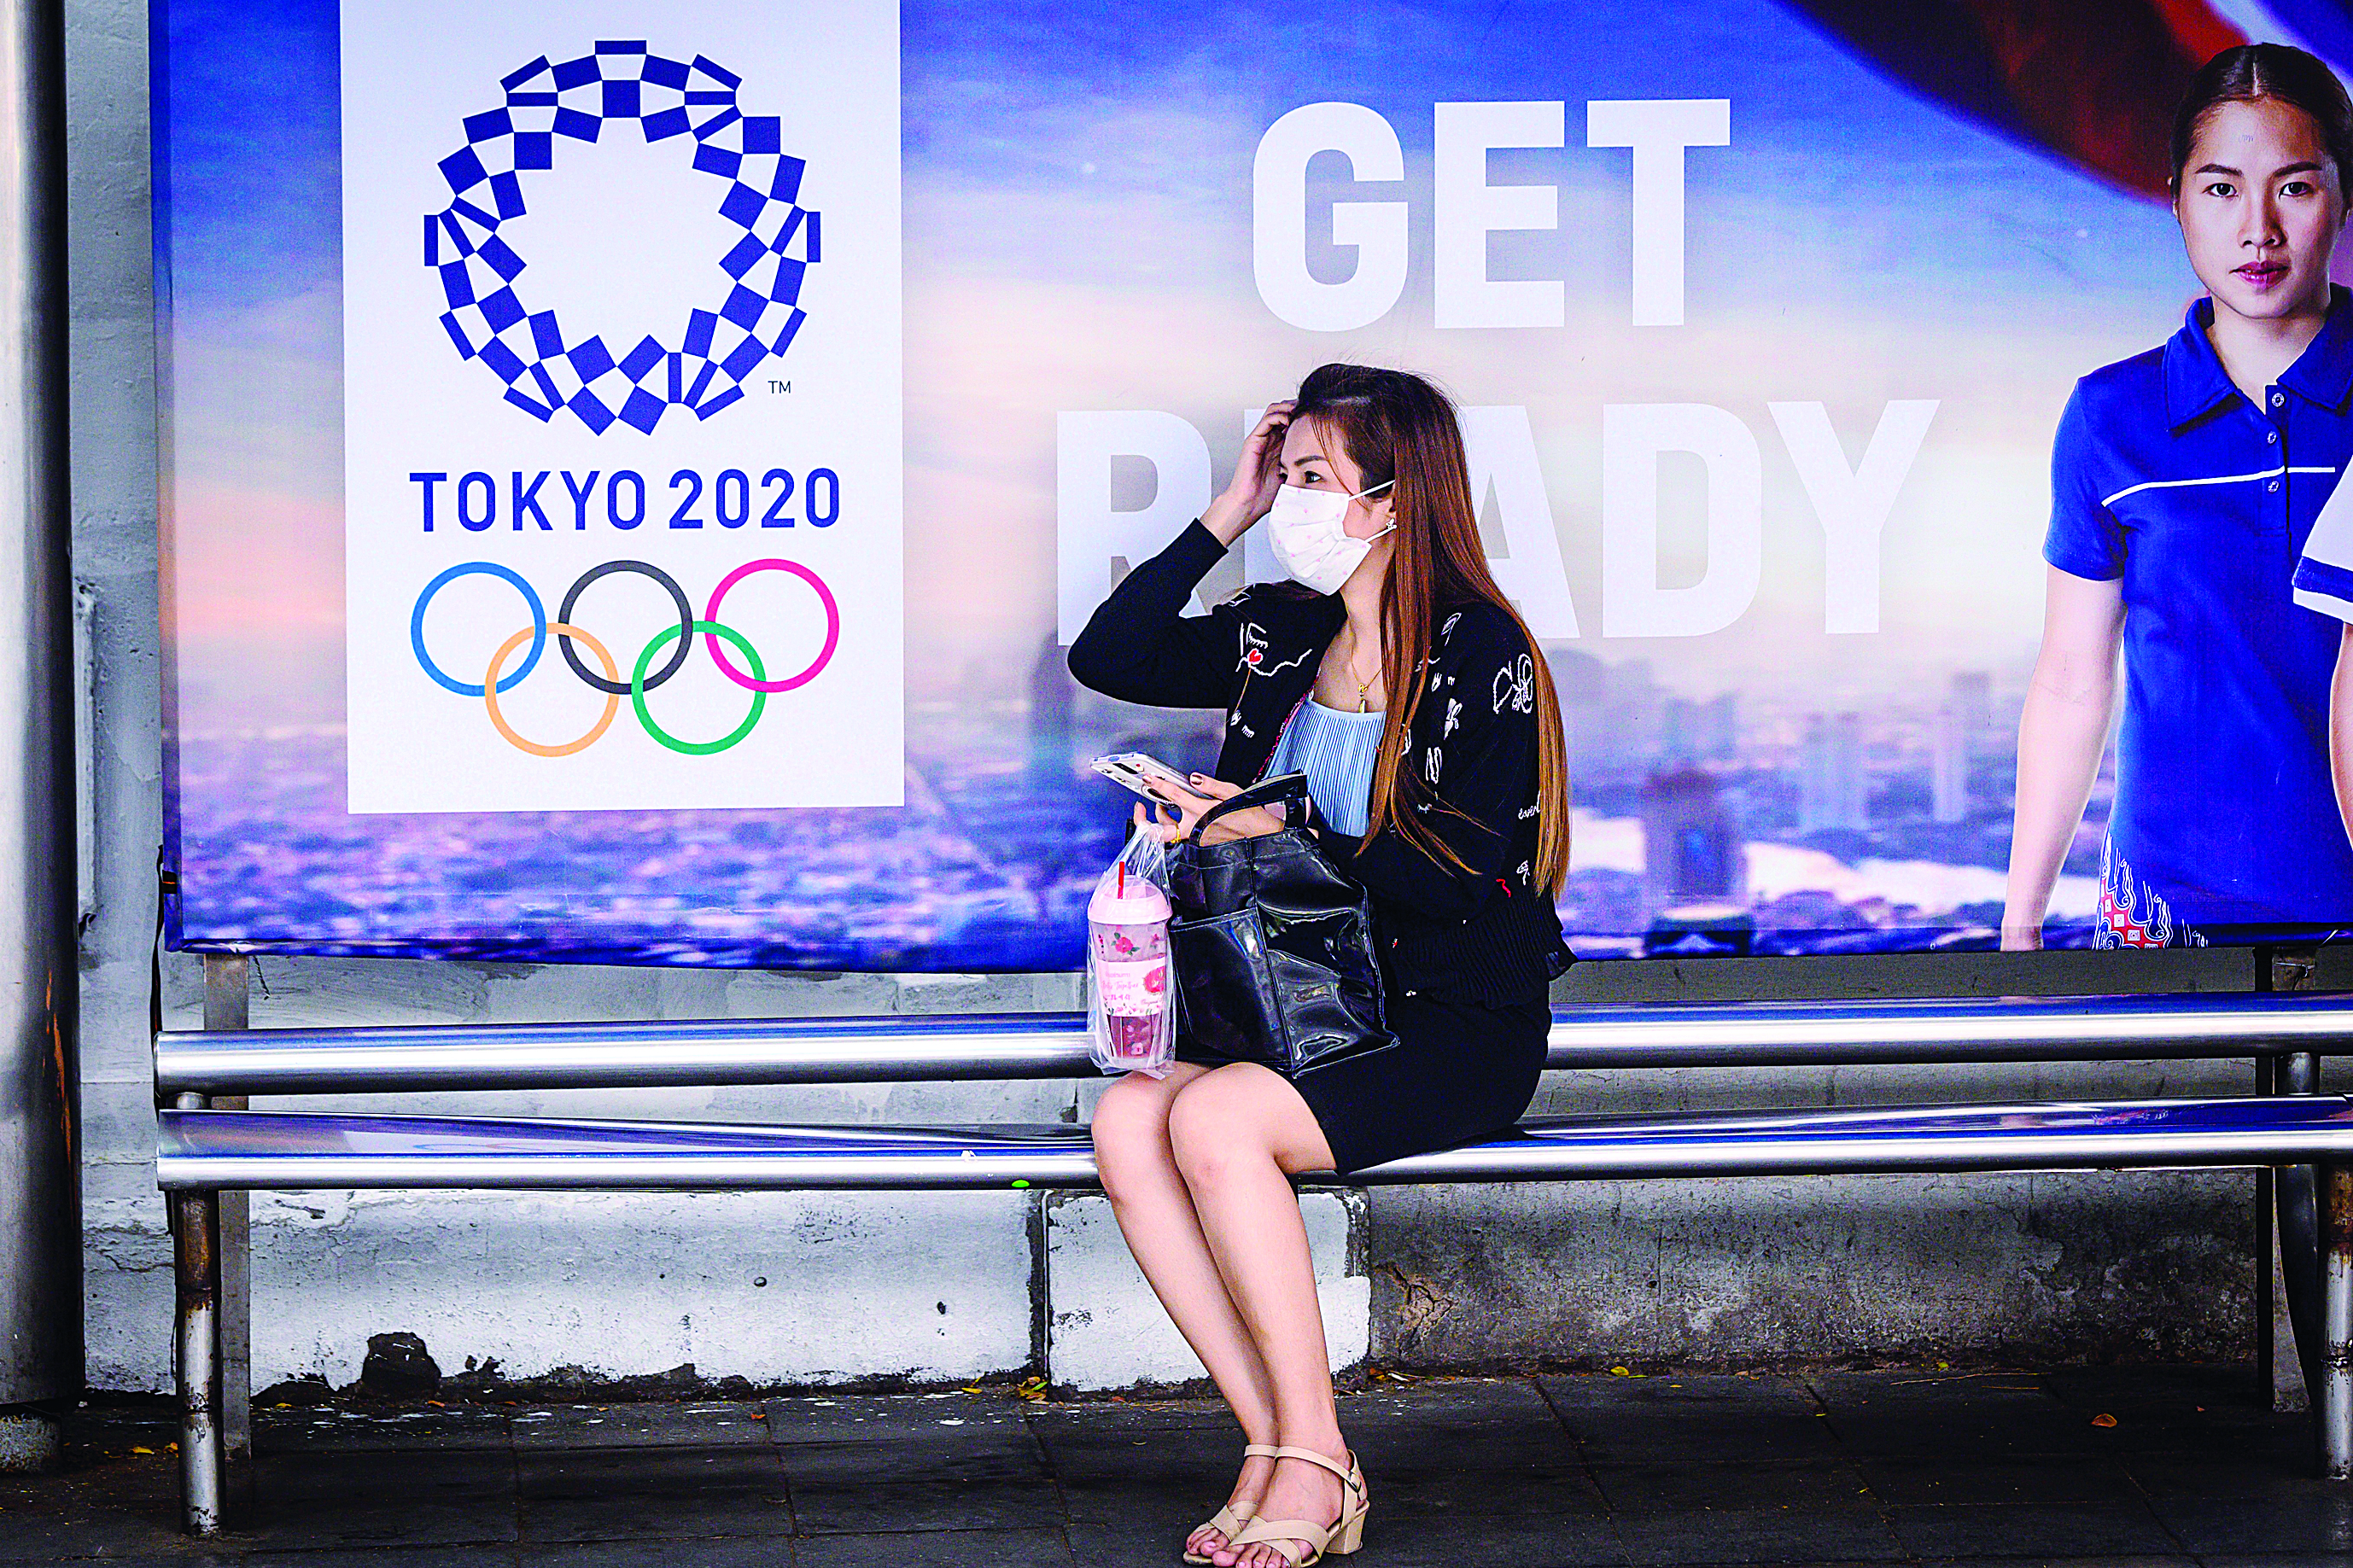 A woman wearing a facemask, amid concerns over the spread of the COVID-19 coronavirus, sits at a bus stop in front of a Tokyo 2020 Olympics advertisement in Bangkok on March 16, 2020. (Photo by Mladen ANTONOV / AFP)